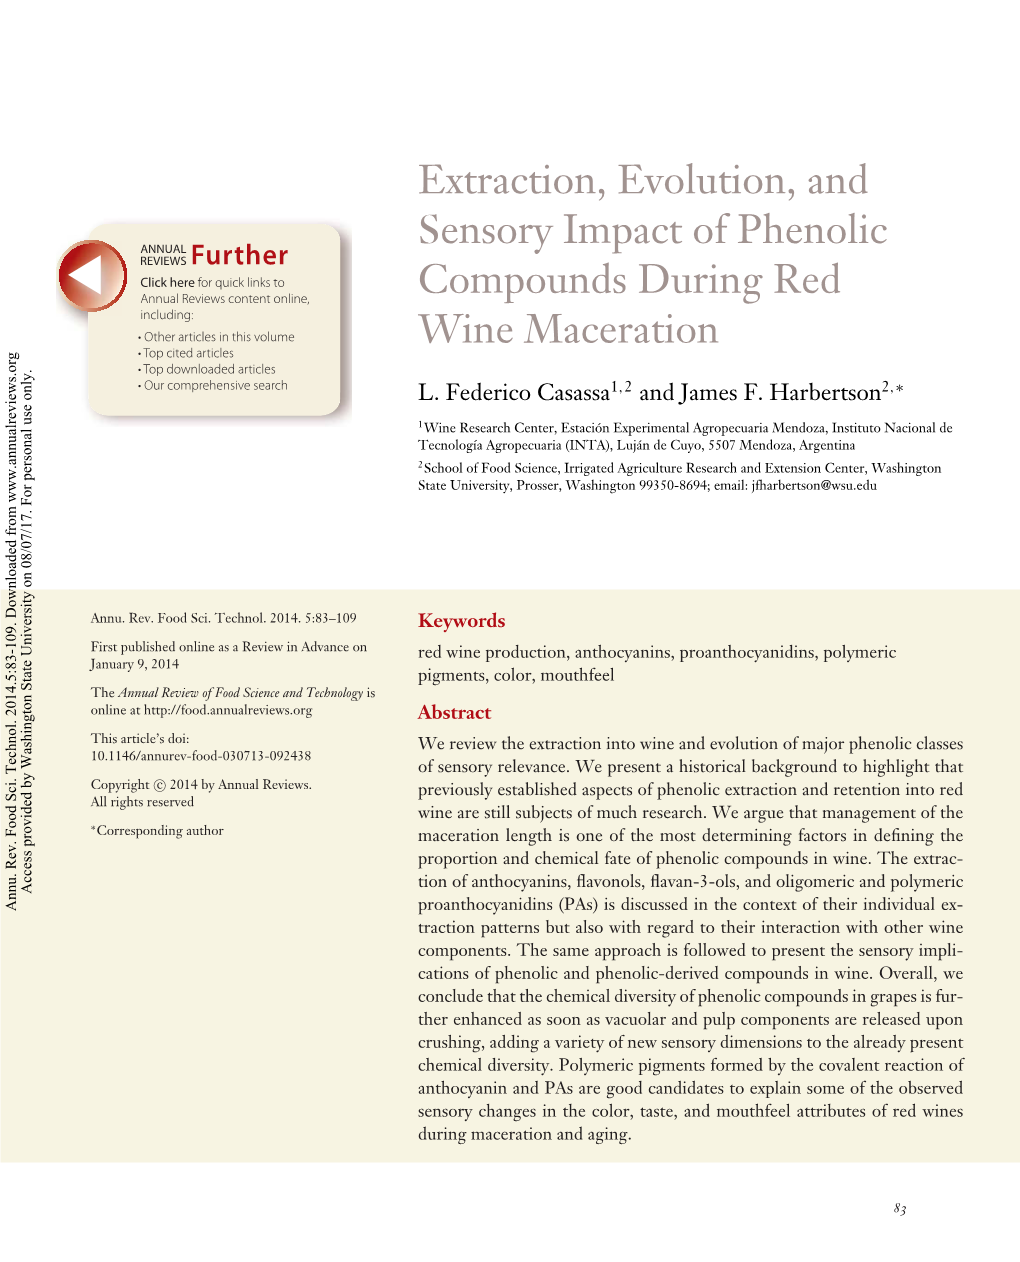 Extraction, Evolution, and Sensory Impact of Phenolic Compounds During Red Wine Maceration